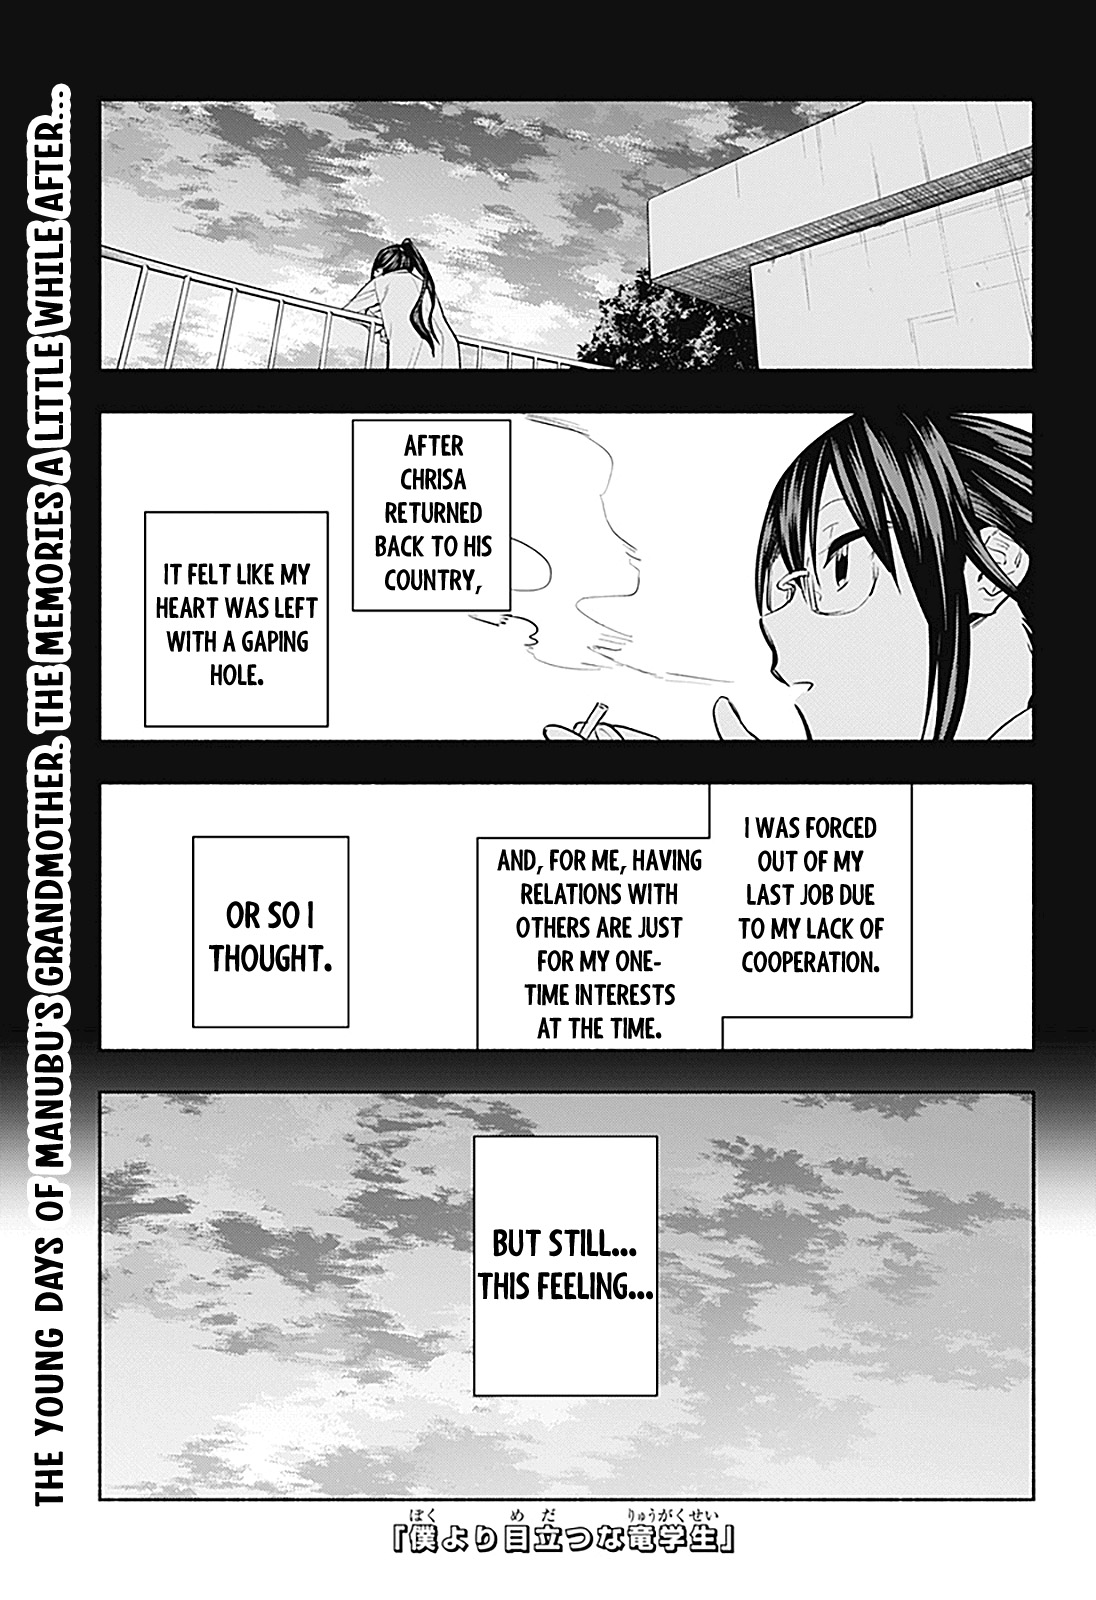 That Dragon (Exchange) Student Stands Out More Than Me - Page 2